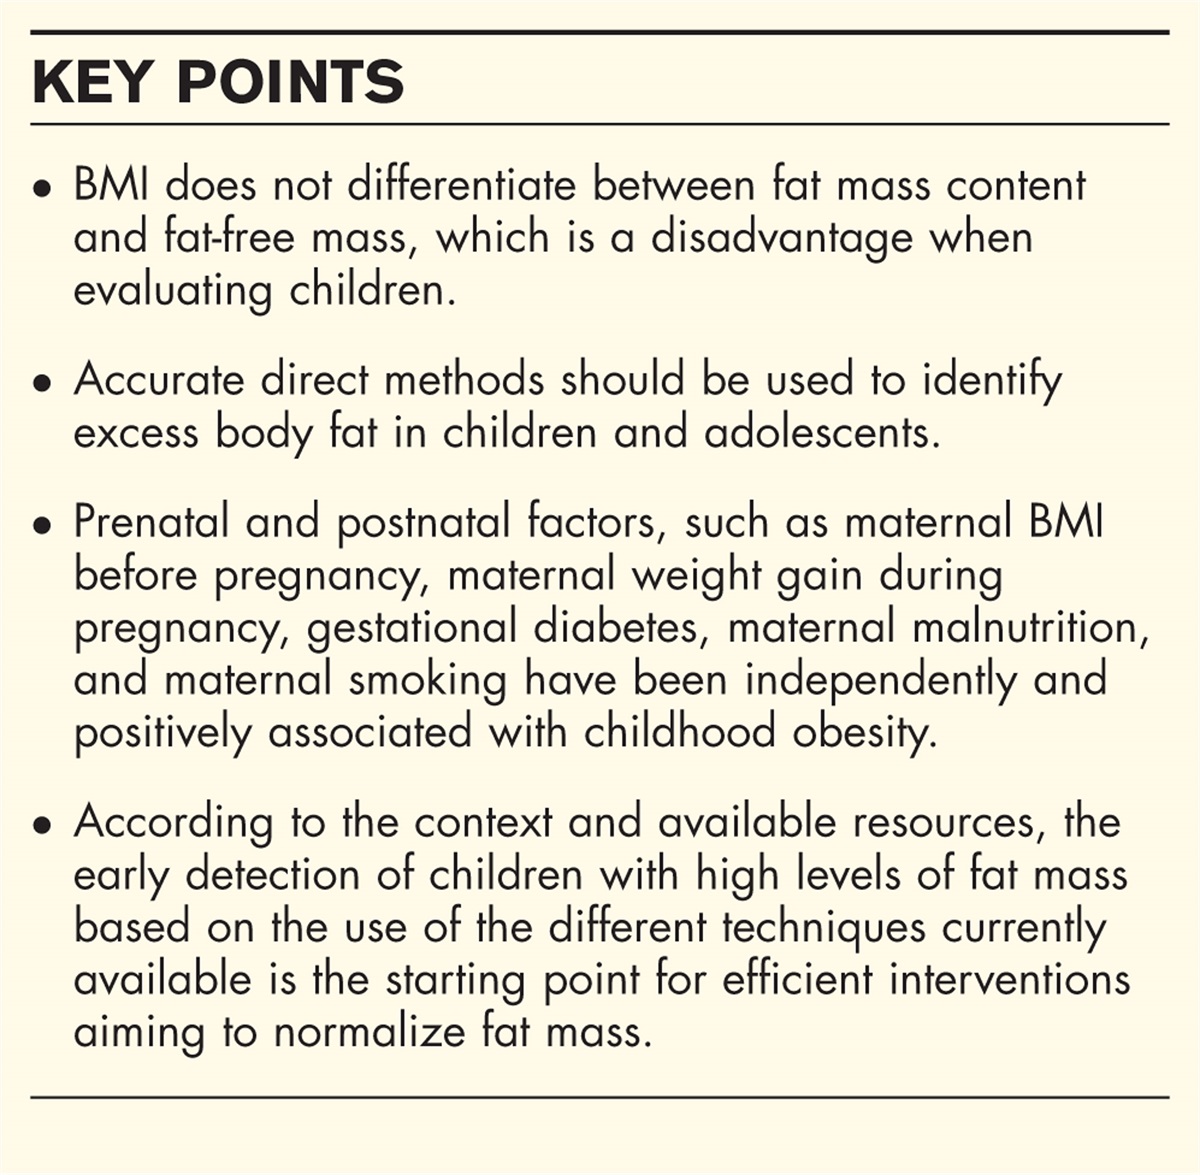 Predicting of excess body fat in children